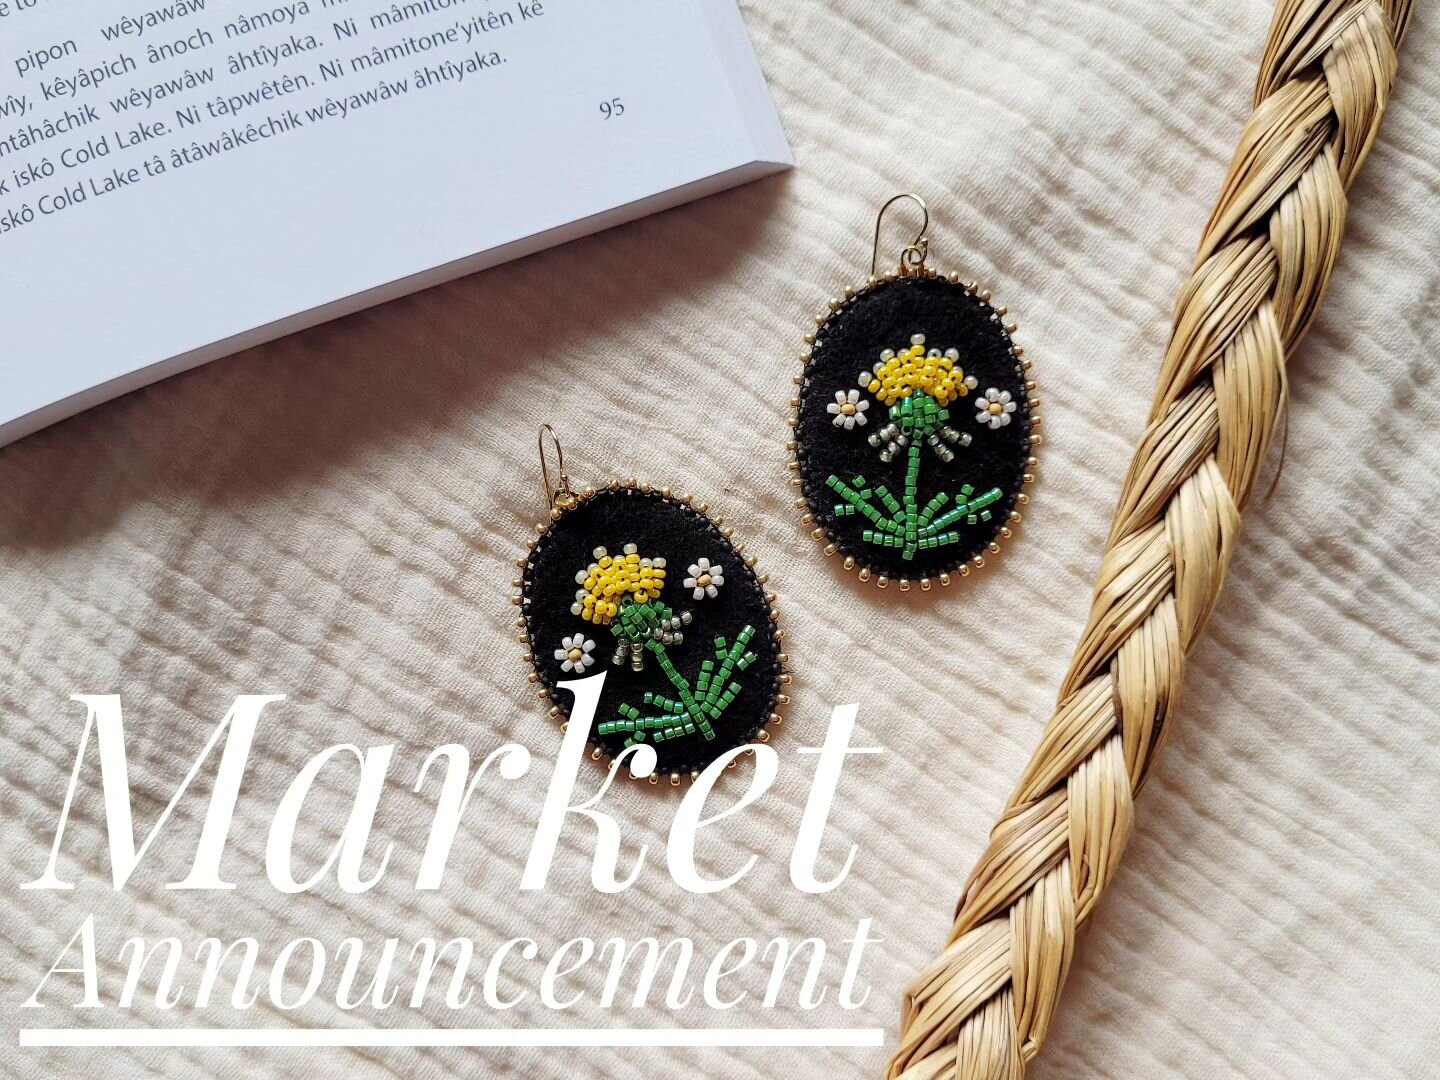 I'll be at the Banff Christmas Market November 17-19th!! 🎄I'm working with my very talented friend @hello_bead, please come by and say hello if you're in the area!!⠀
⠀
You can check my &quot;Markets&quot; section on my website for more info (or sign